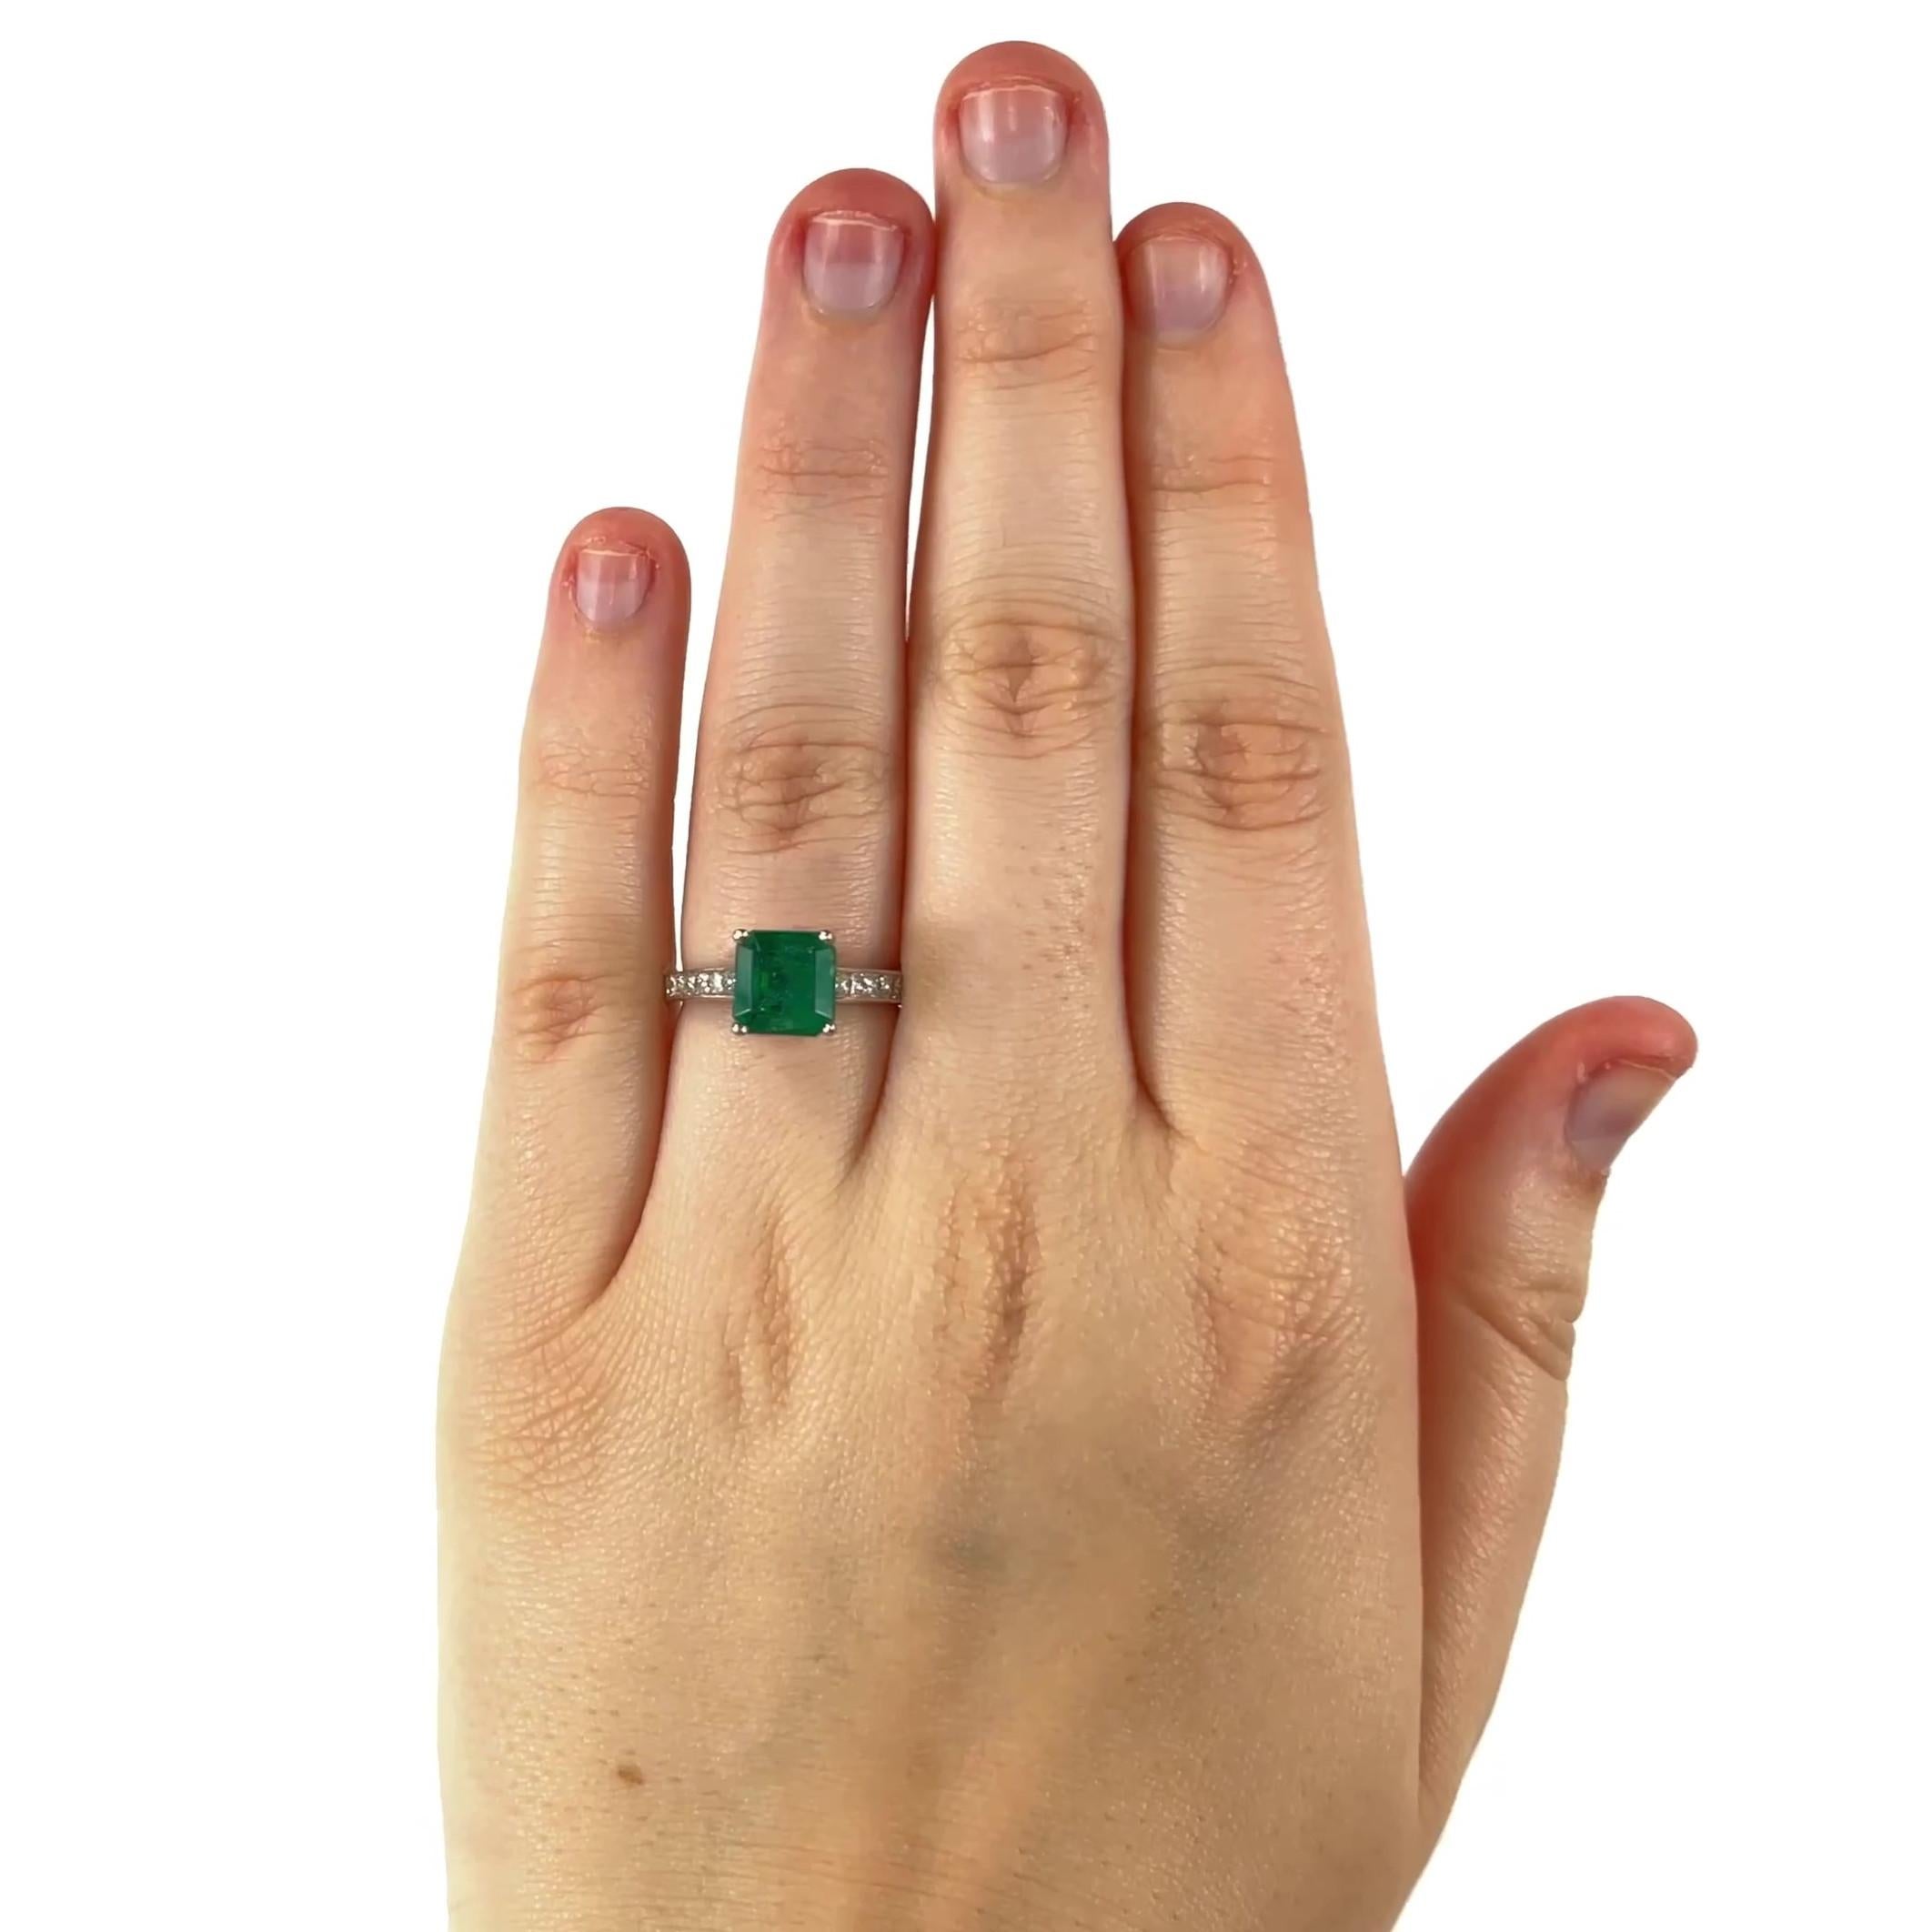 One Emerald Diamond Platinum Ring. Featuring one square shaped emerald of 2.01 carats. Accented by 16 princess cut diamonds with a total weight of approximately 0.80 carats, graded F-G color, VS clarity. Crafted in platinum with purity mark. Circa